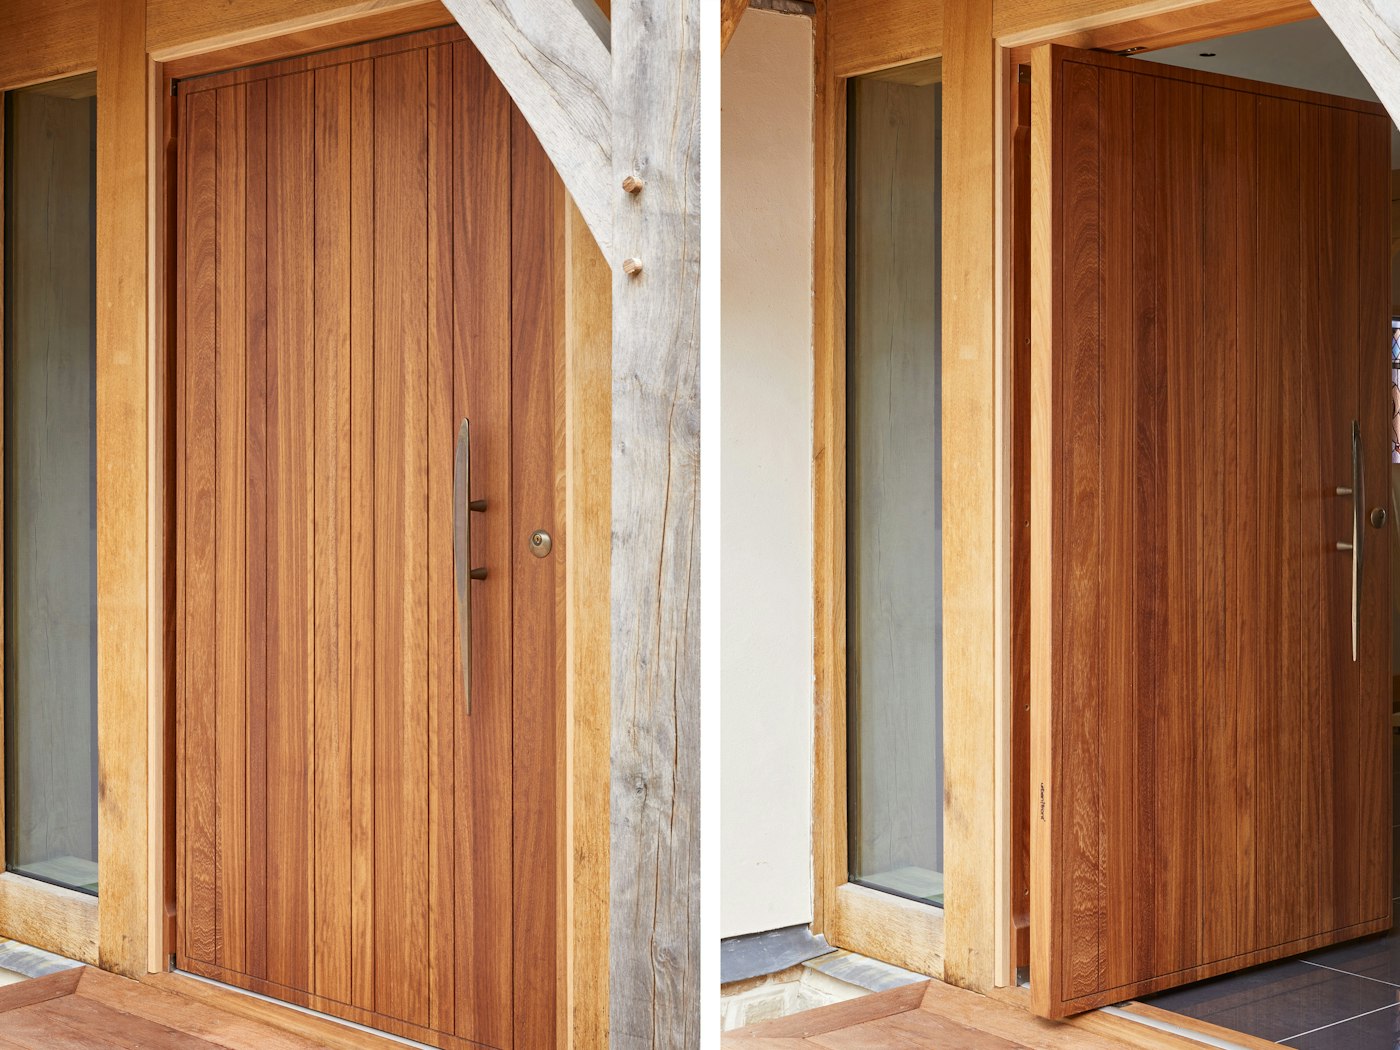 This Rondo V front door features a pivot opening